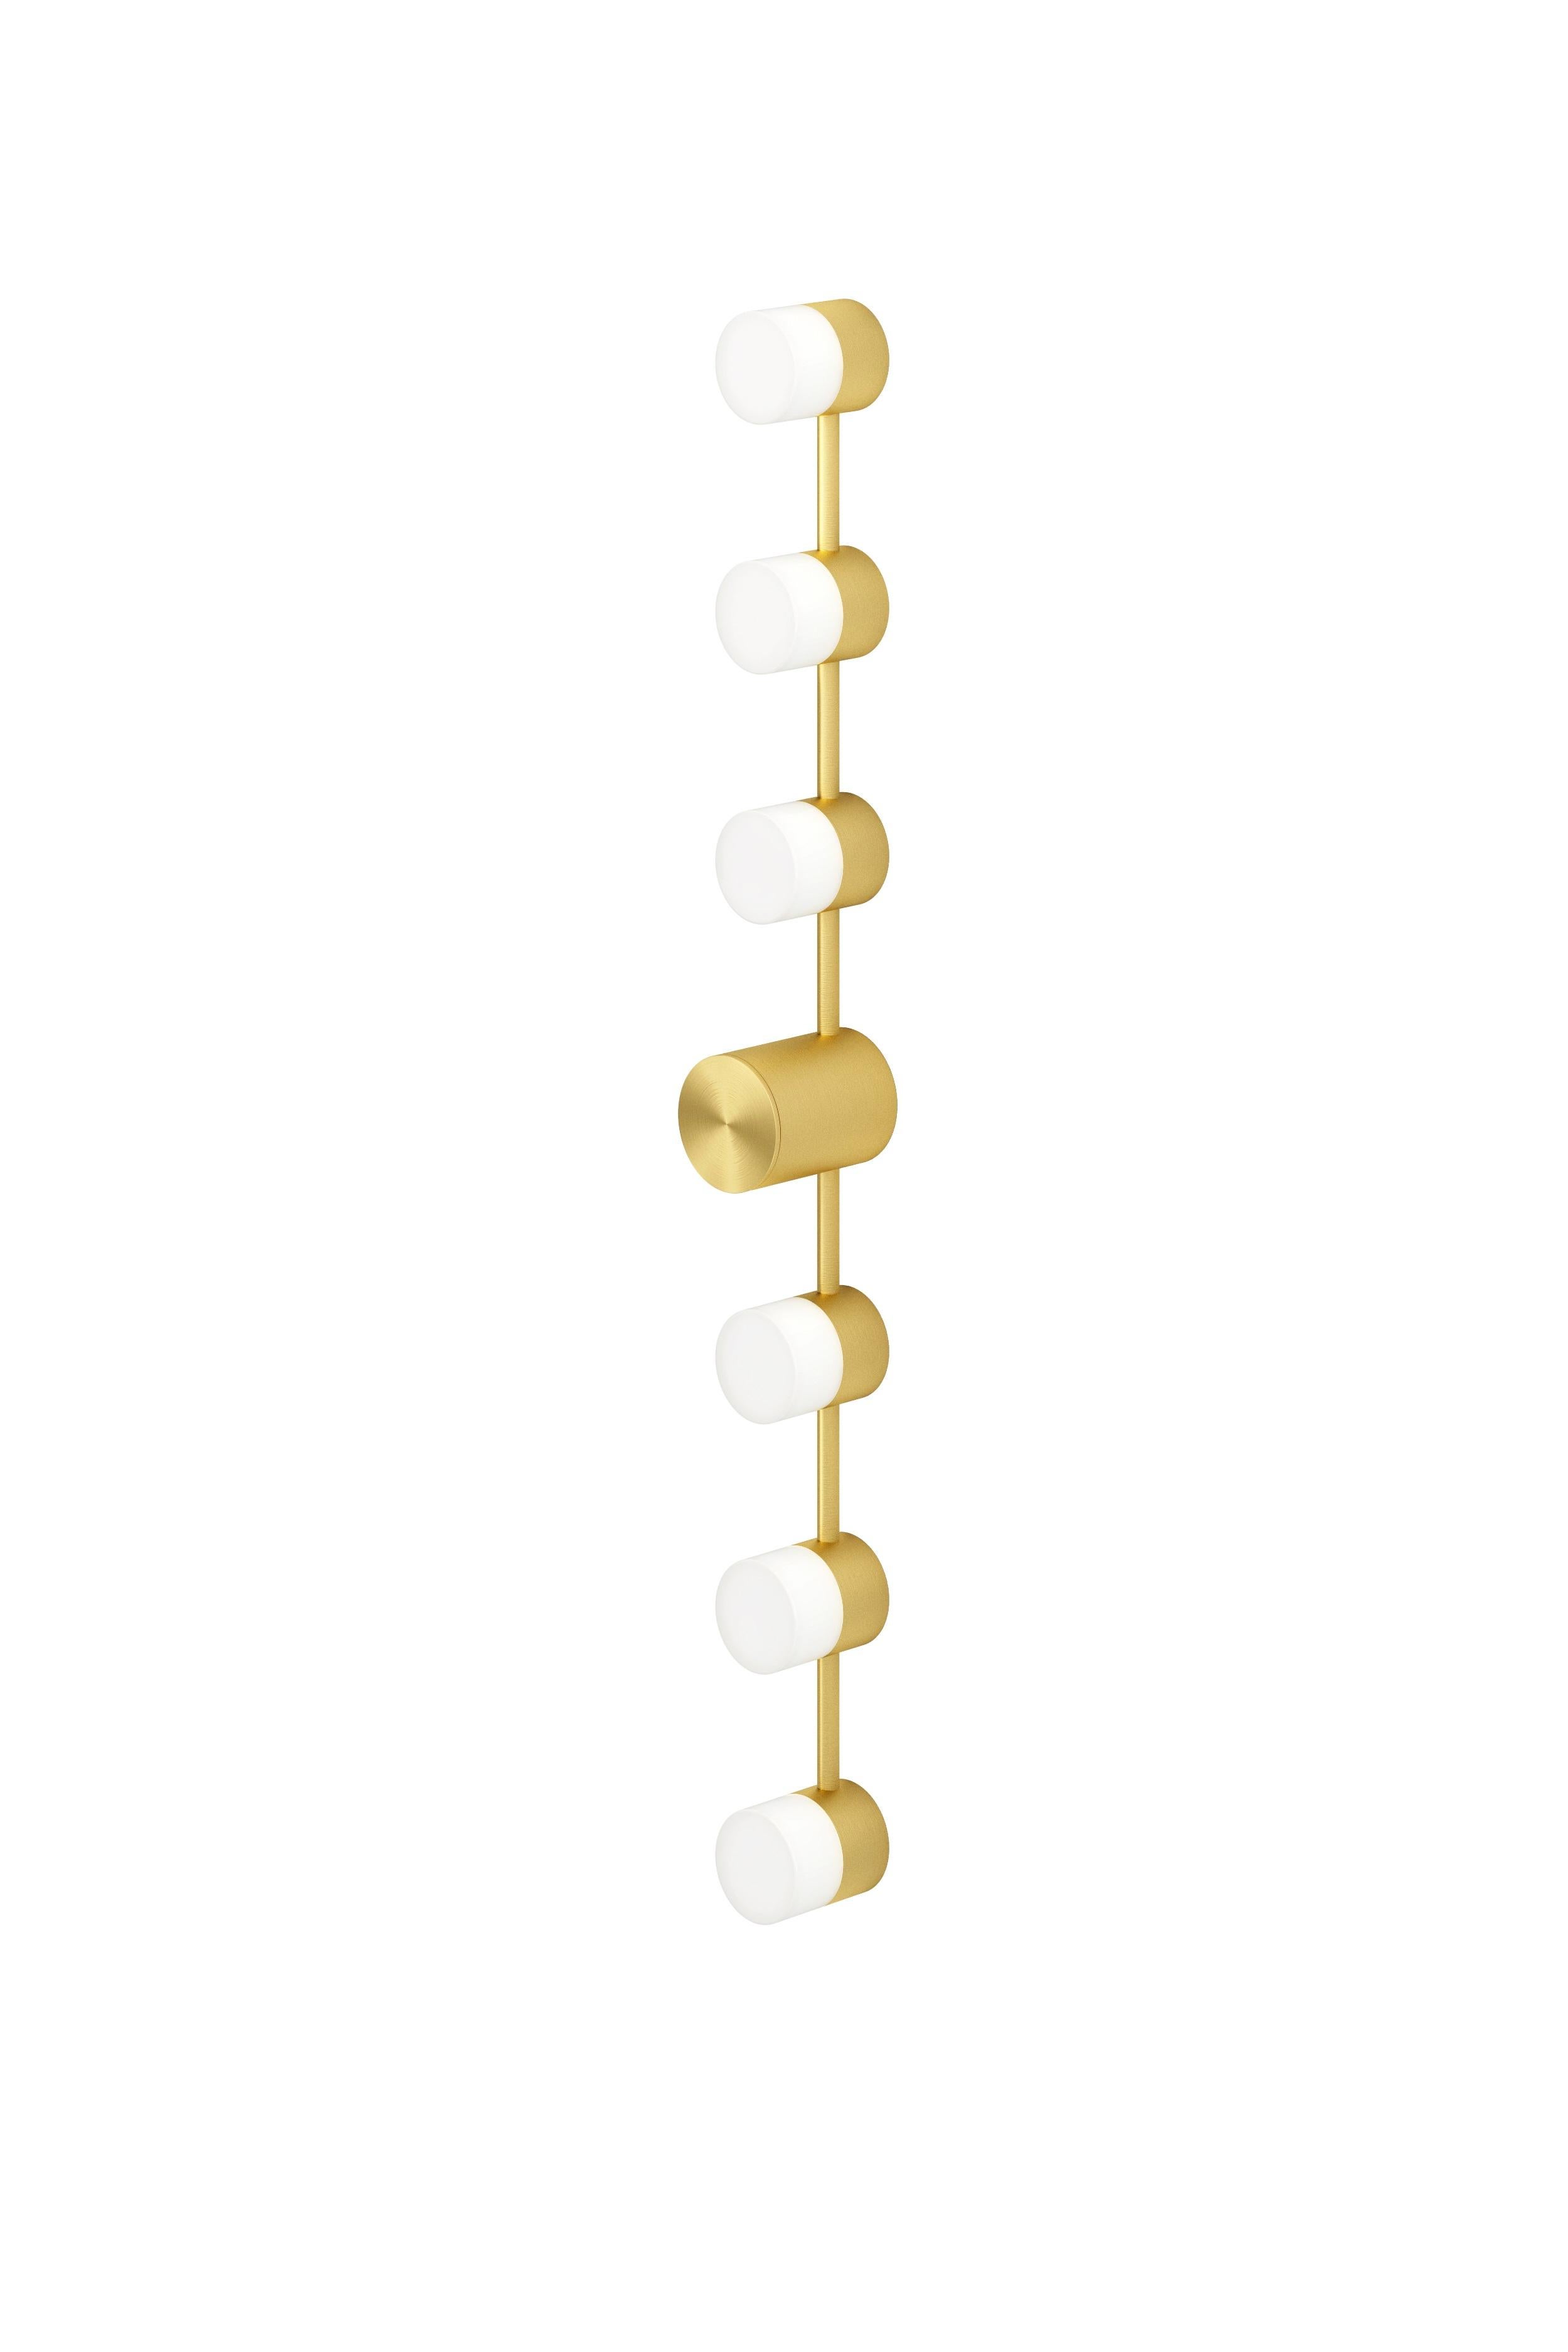 Post-Modern Ip Backstage L6 Satin Brass Wall Light by Emilie Cathelineau For Sale